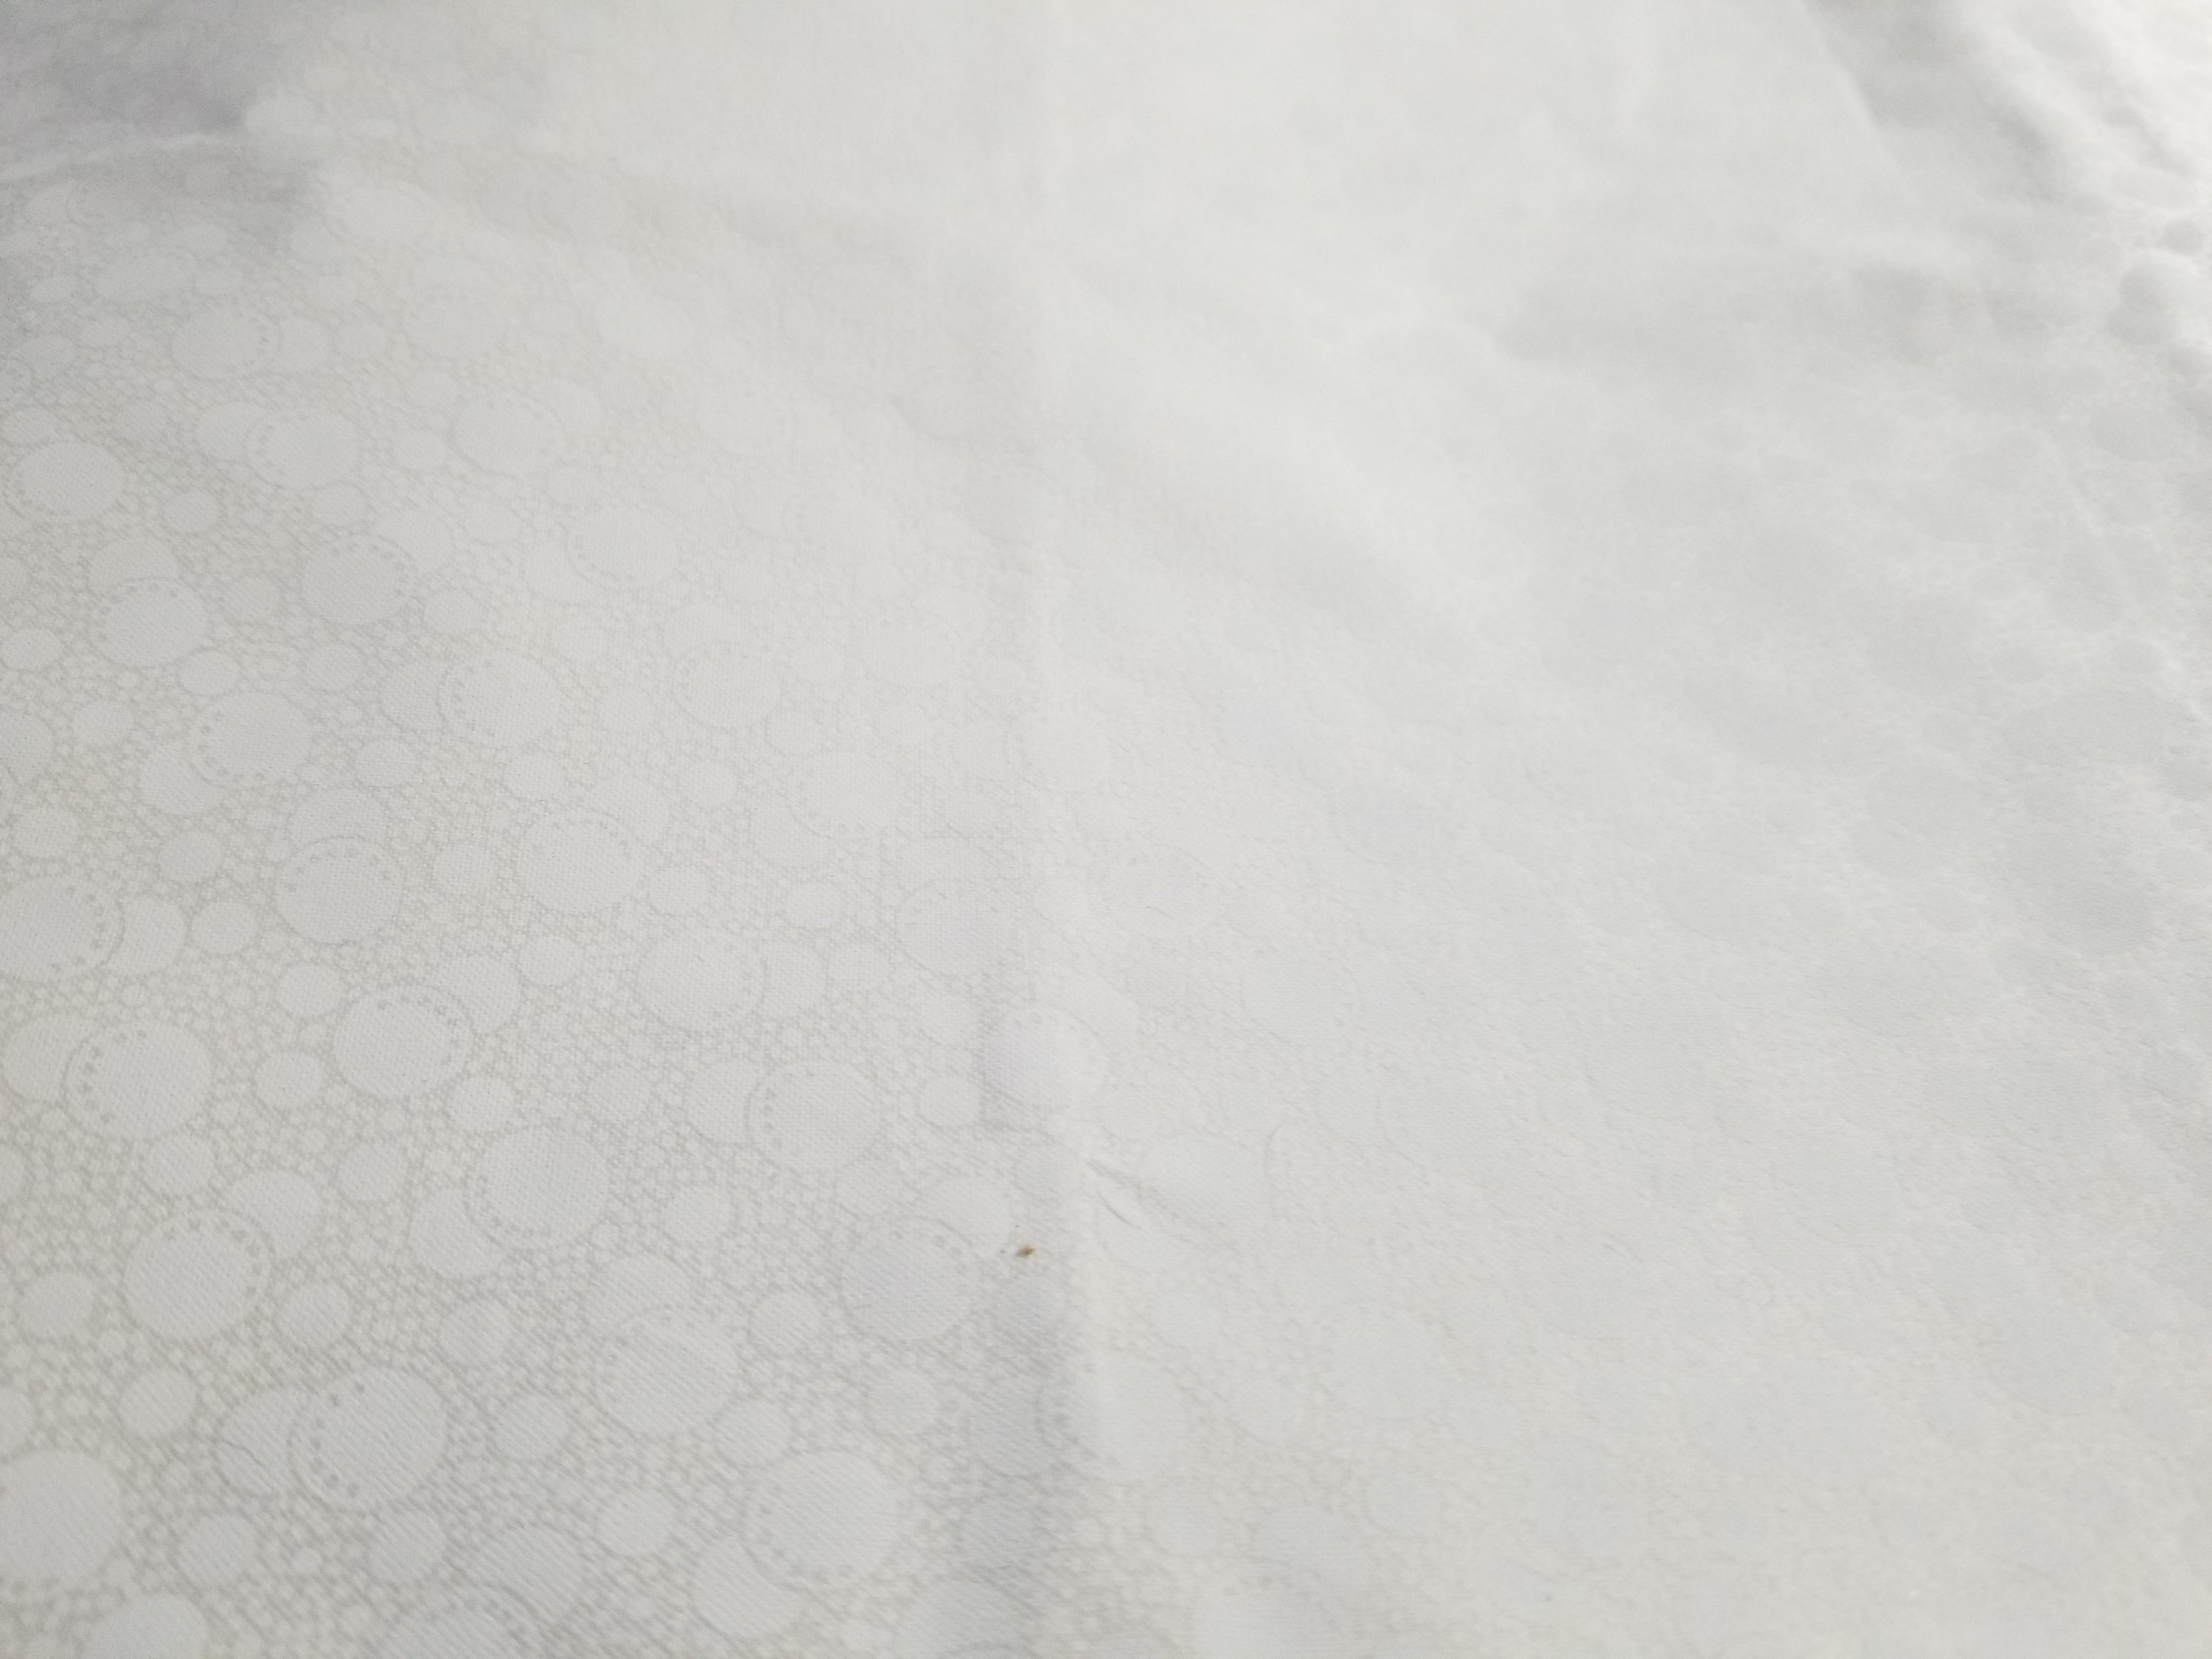 Quilting cotton white tone on tone bubbles dots circles | Etsy